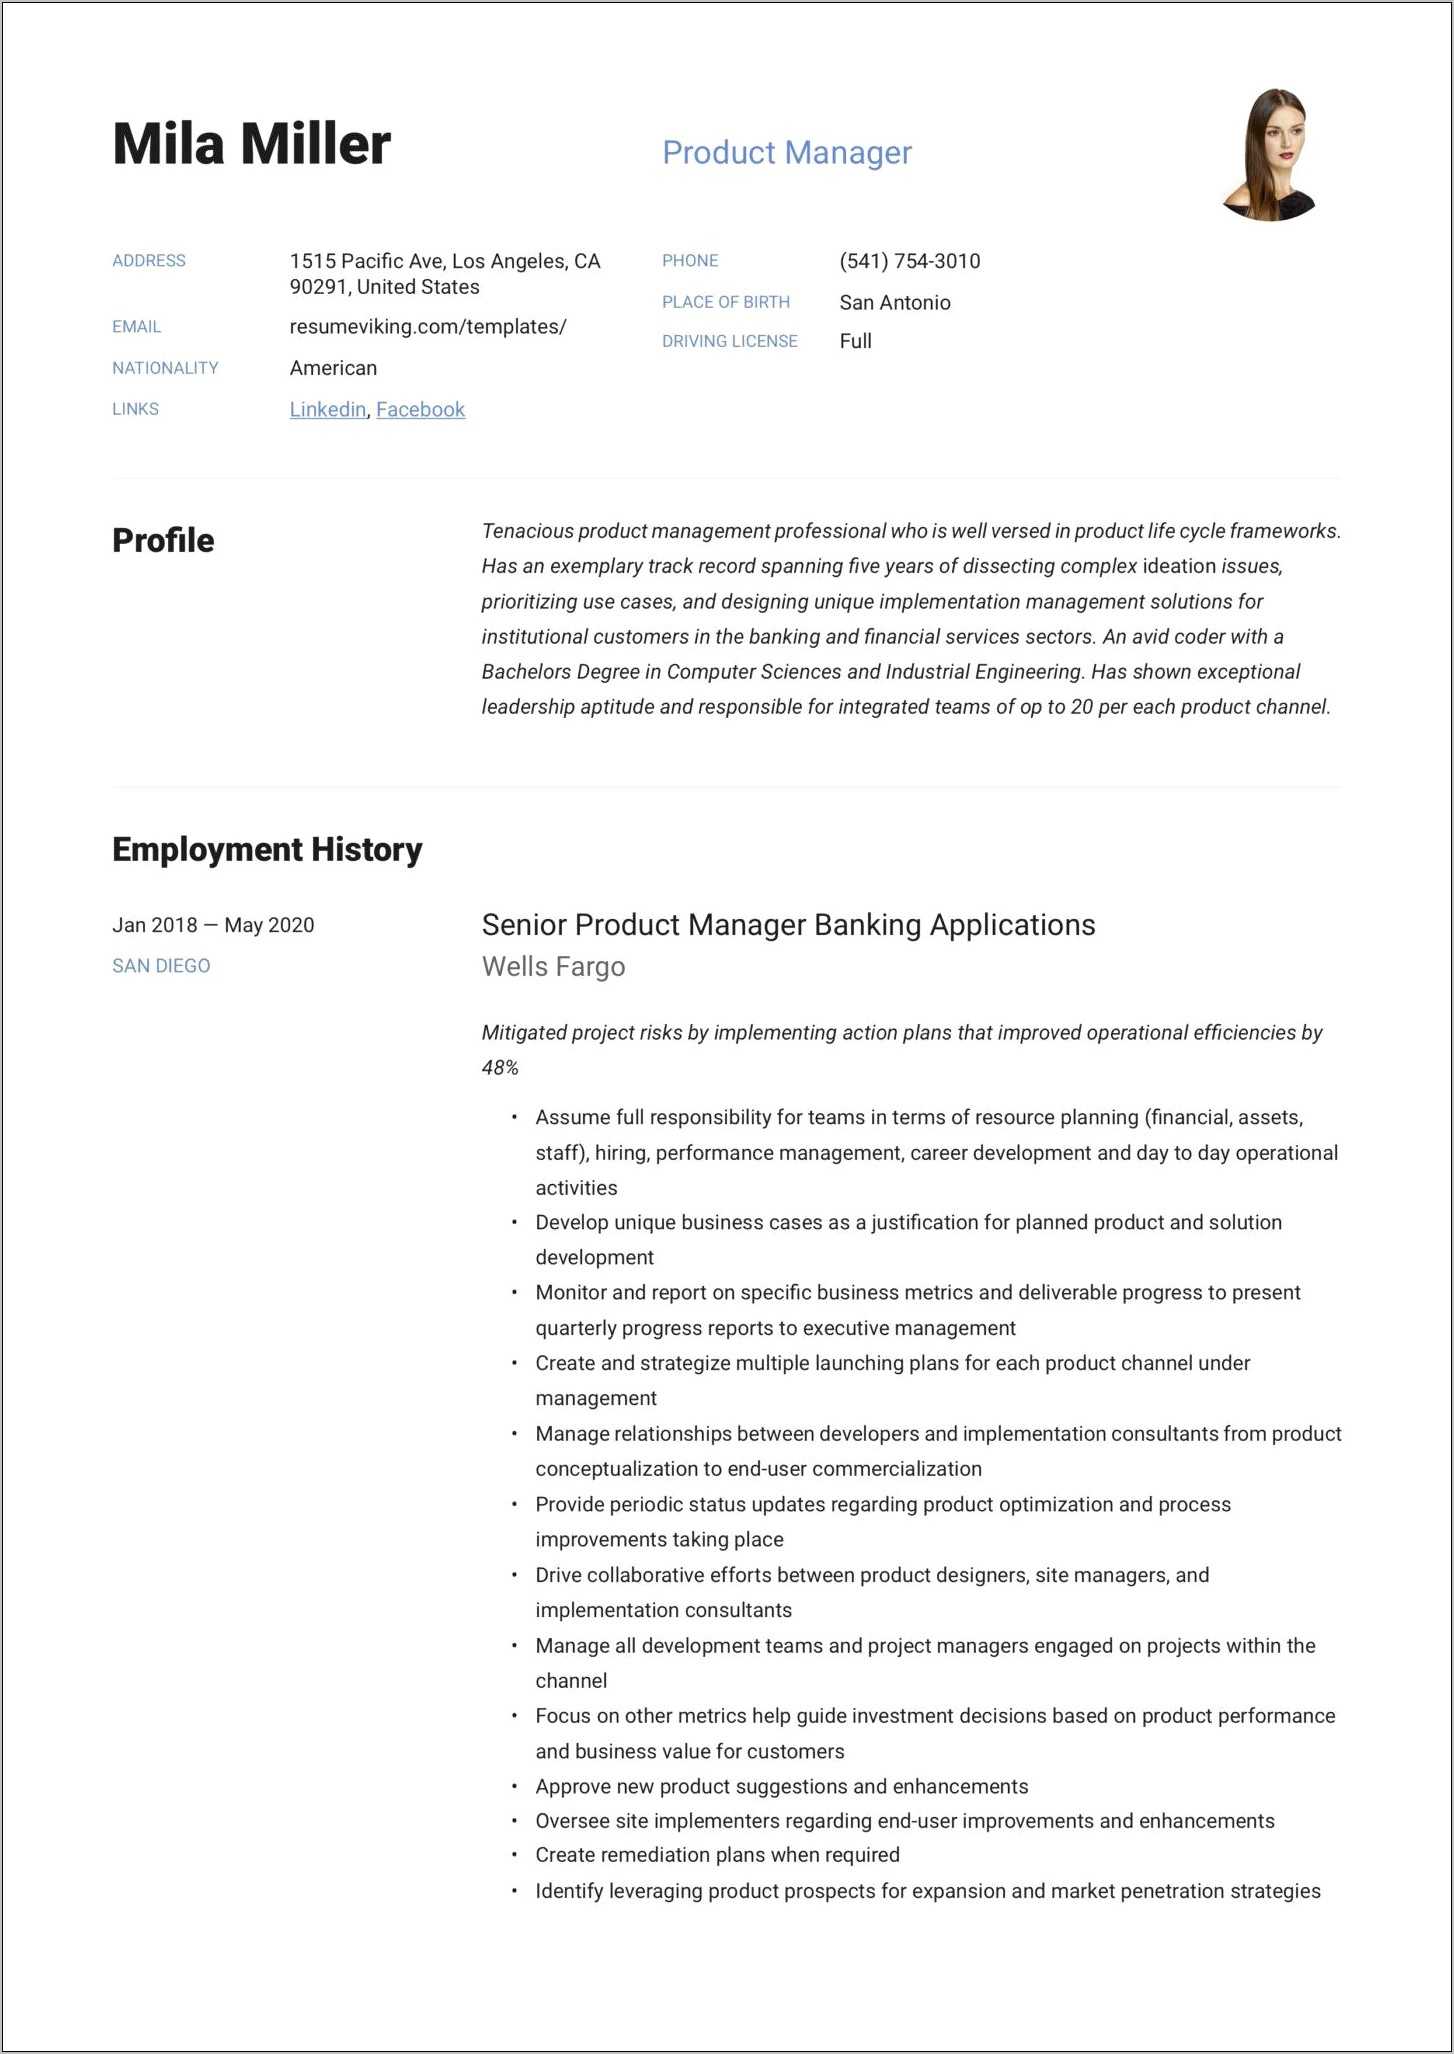 Credit Card Product Manager Resume